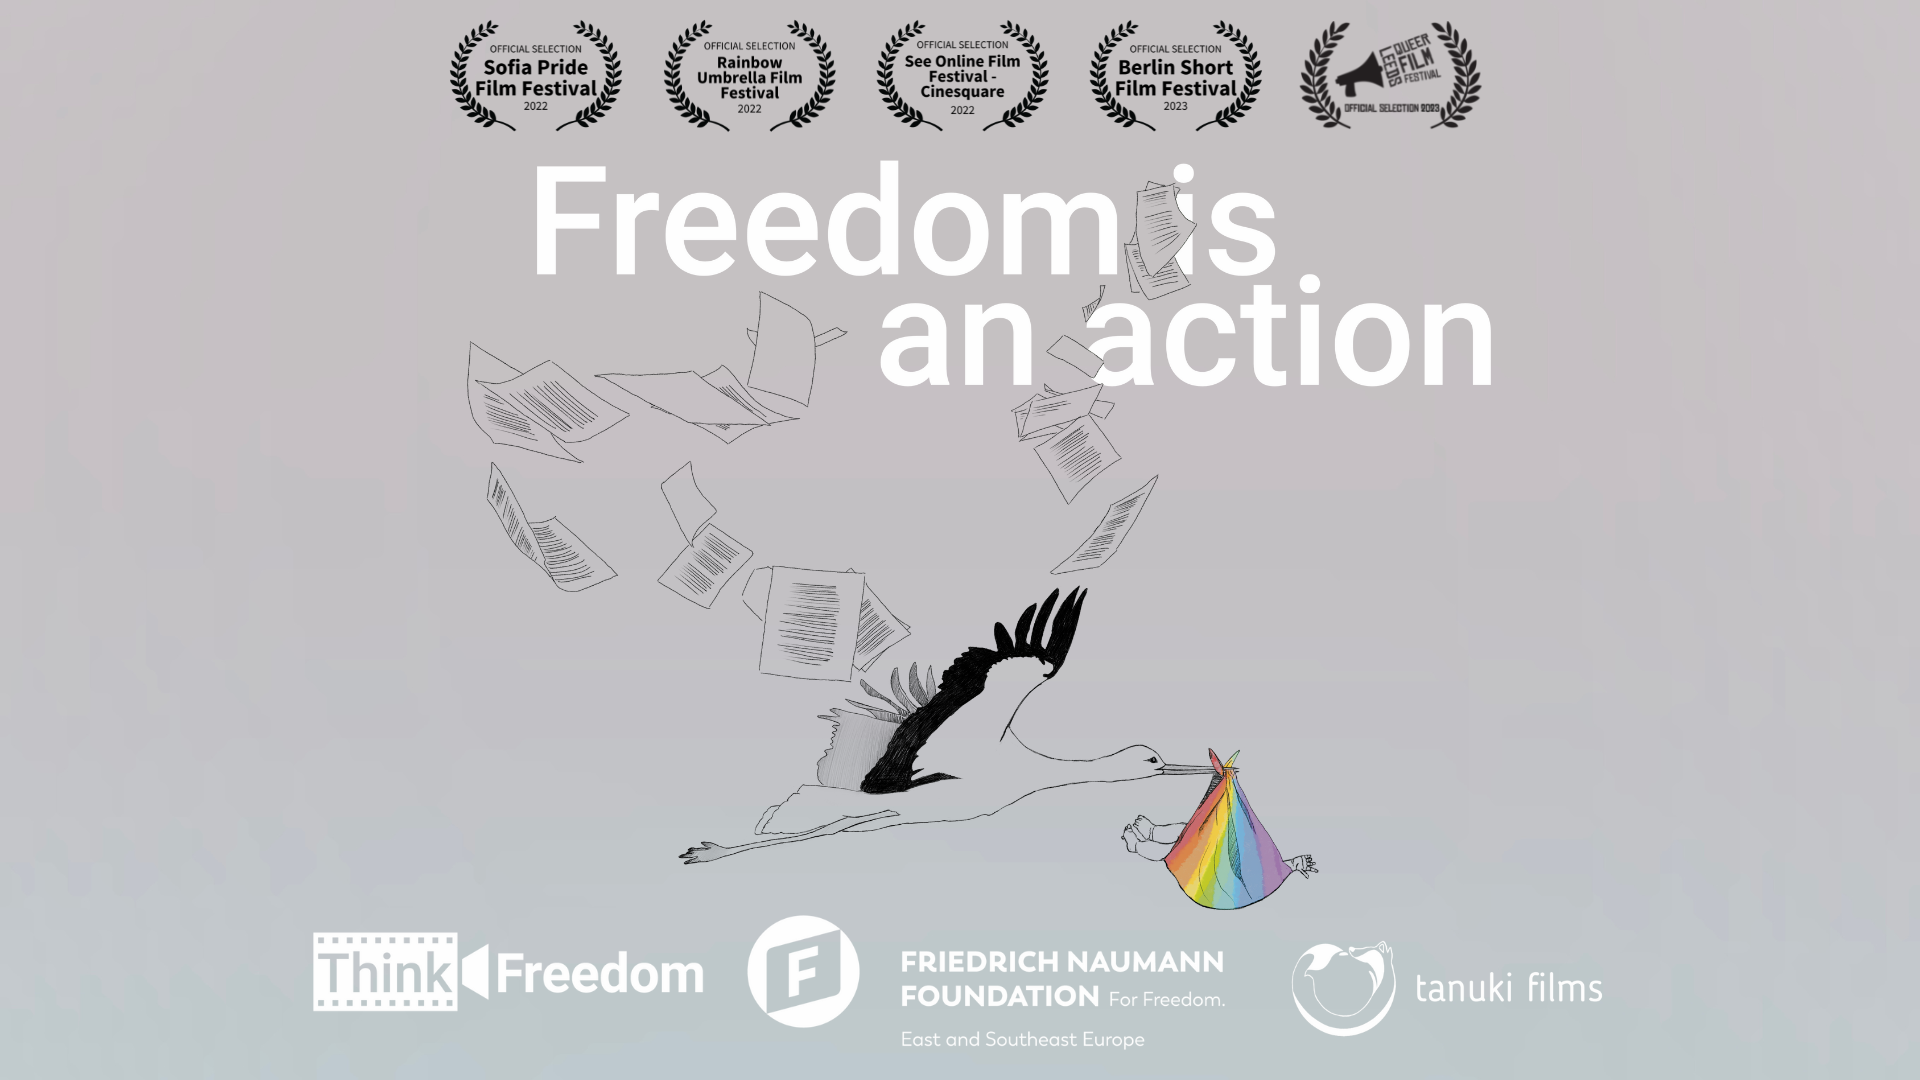 Think Freedom Freedom is in Action Film festivals